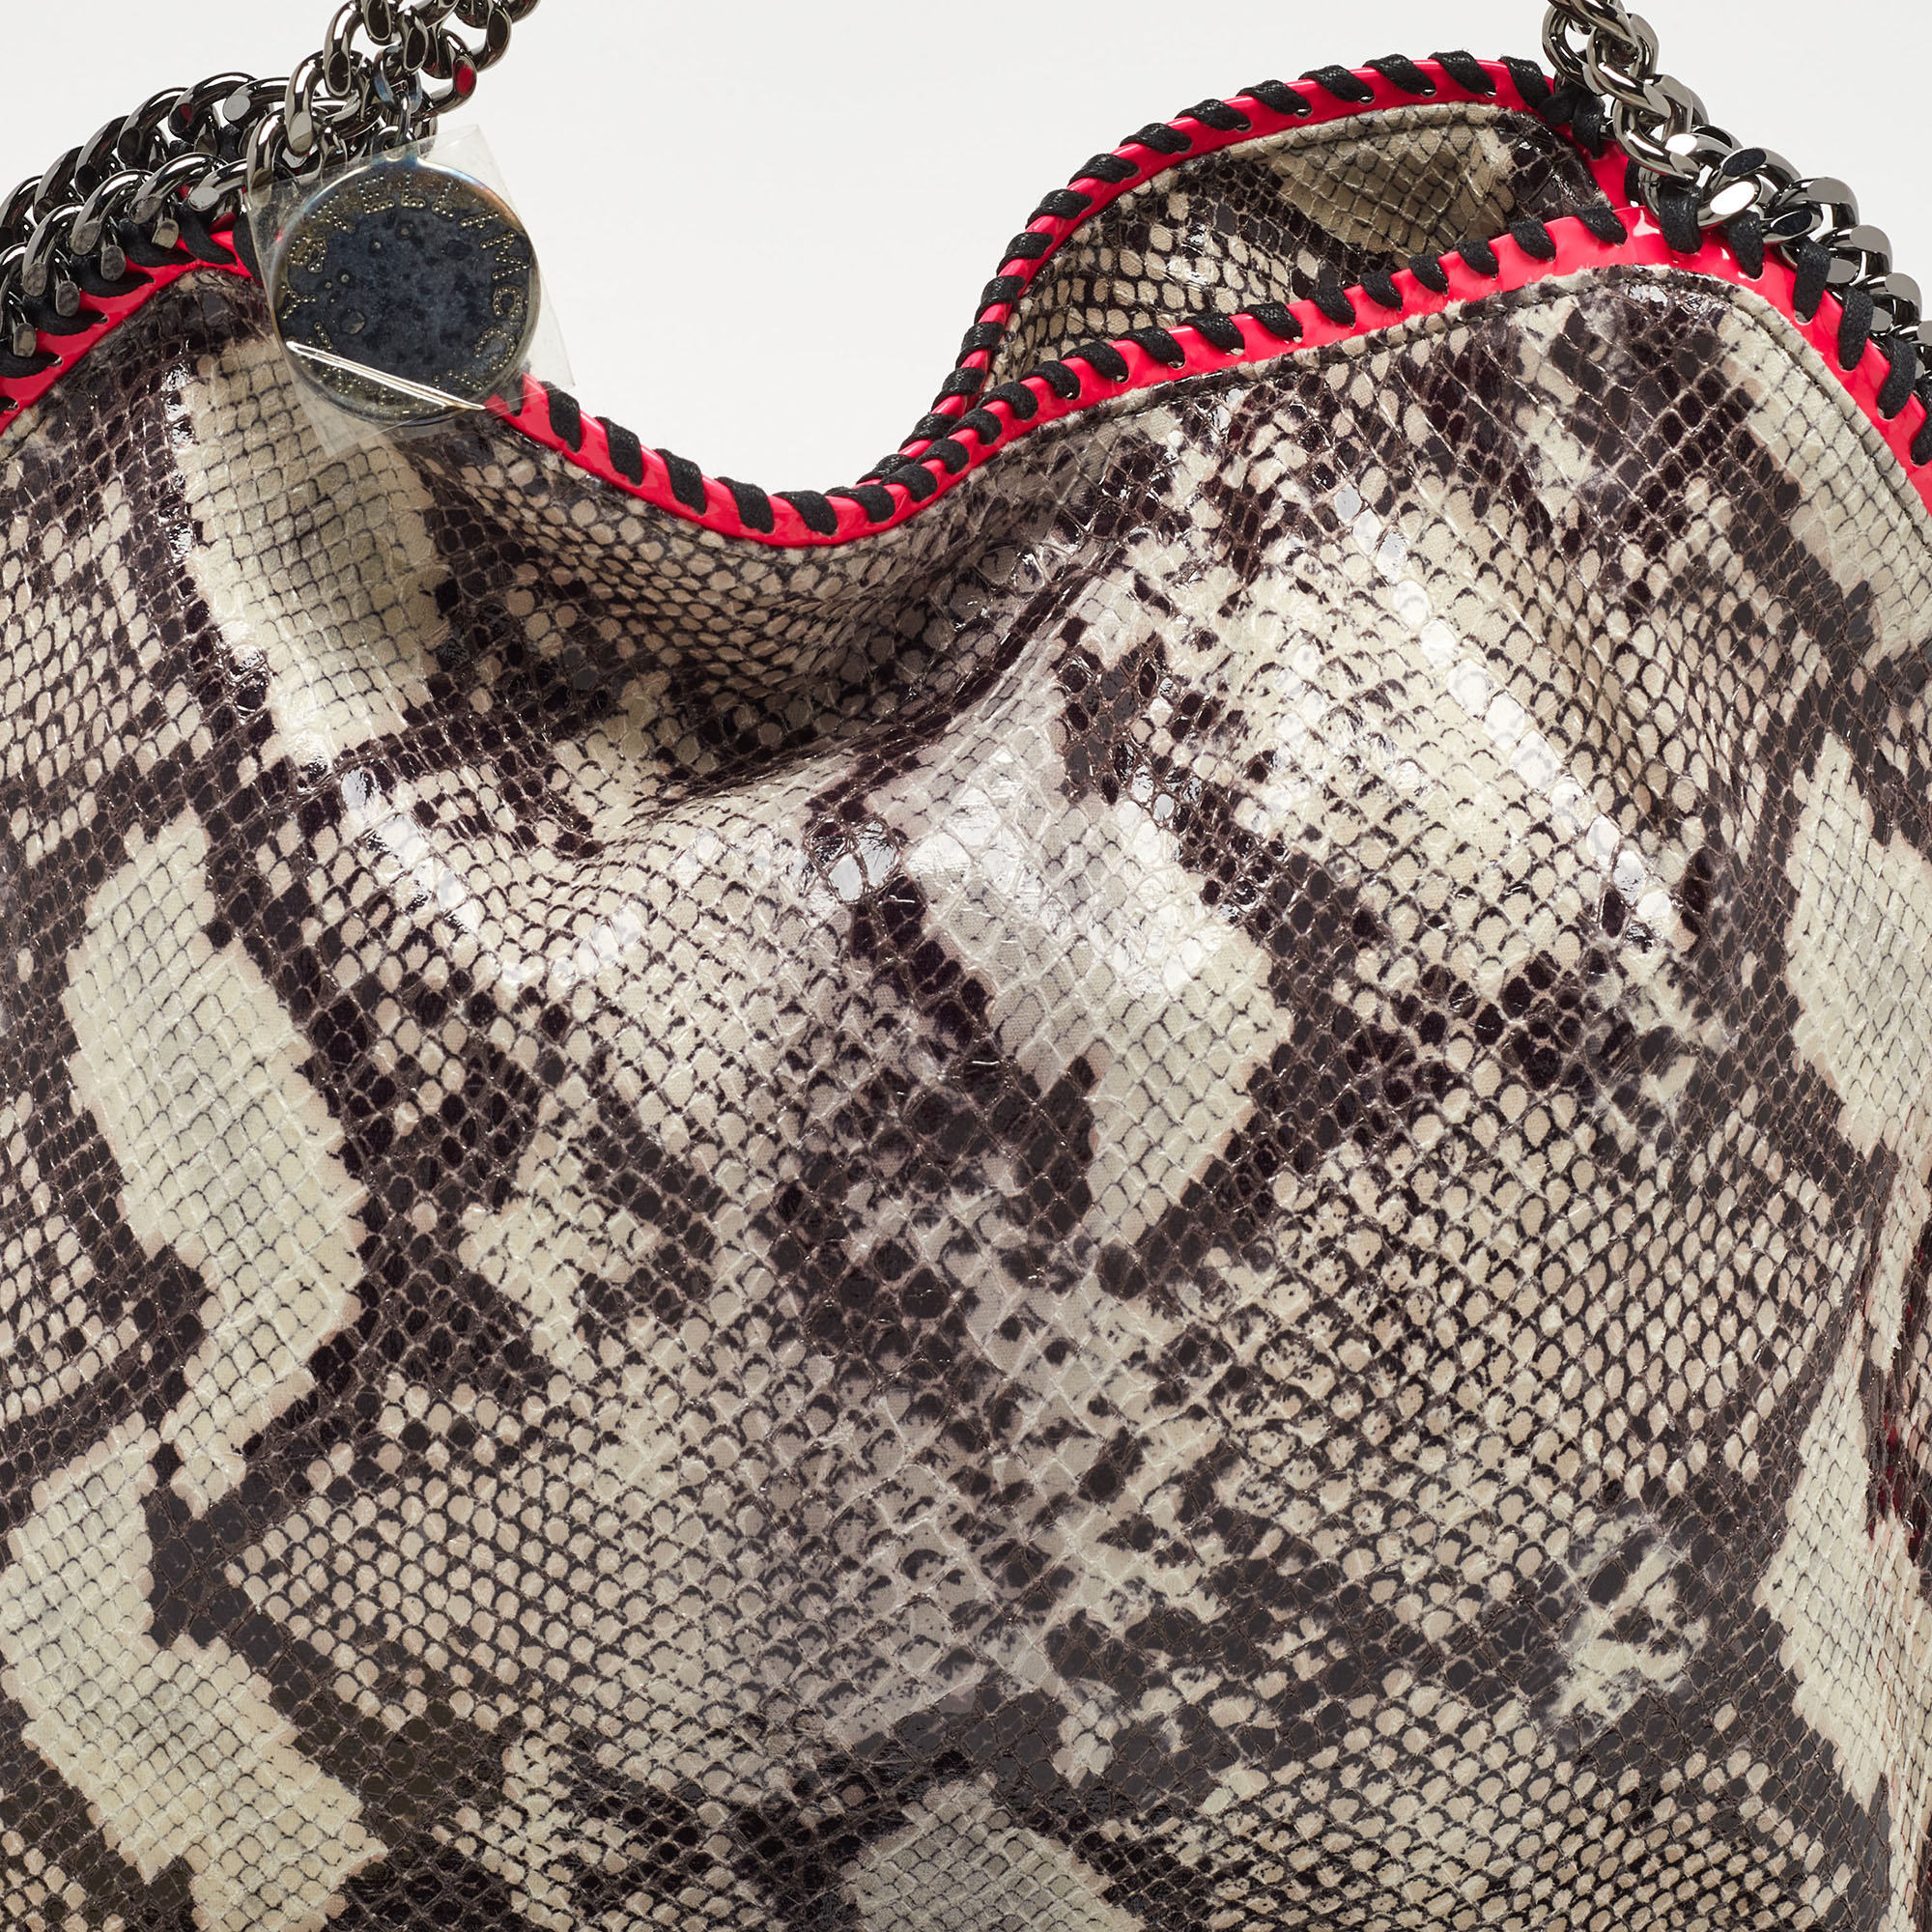 Stella McCartney Beige/Pink Faux Python Embossed Leather And Faux Patent Falabella Tote